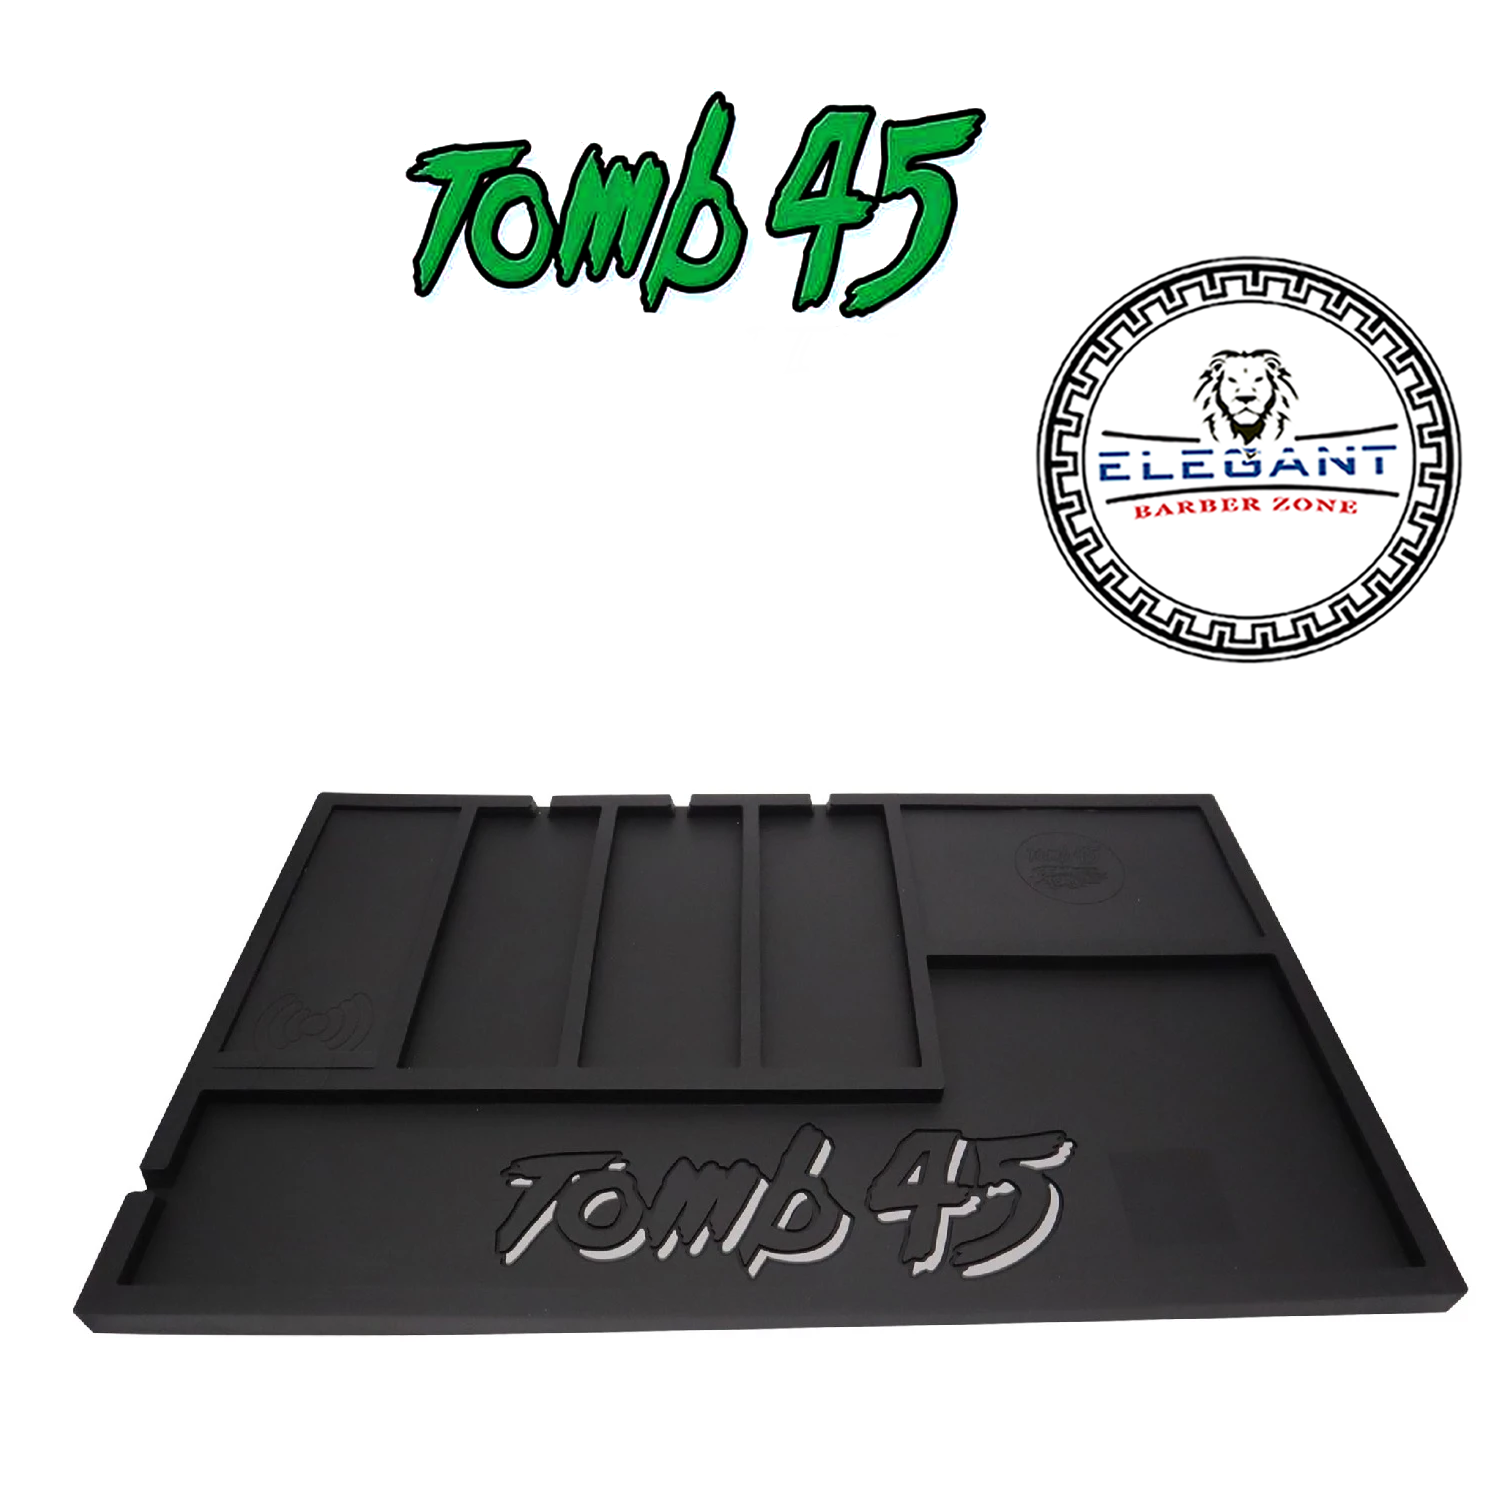 Tomb45 Powered Mats Wireless charging organizing mat (Power Clips sold –  Elegant Barber Zone